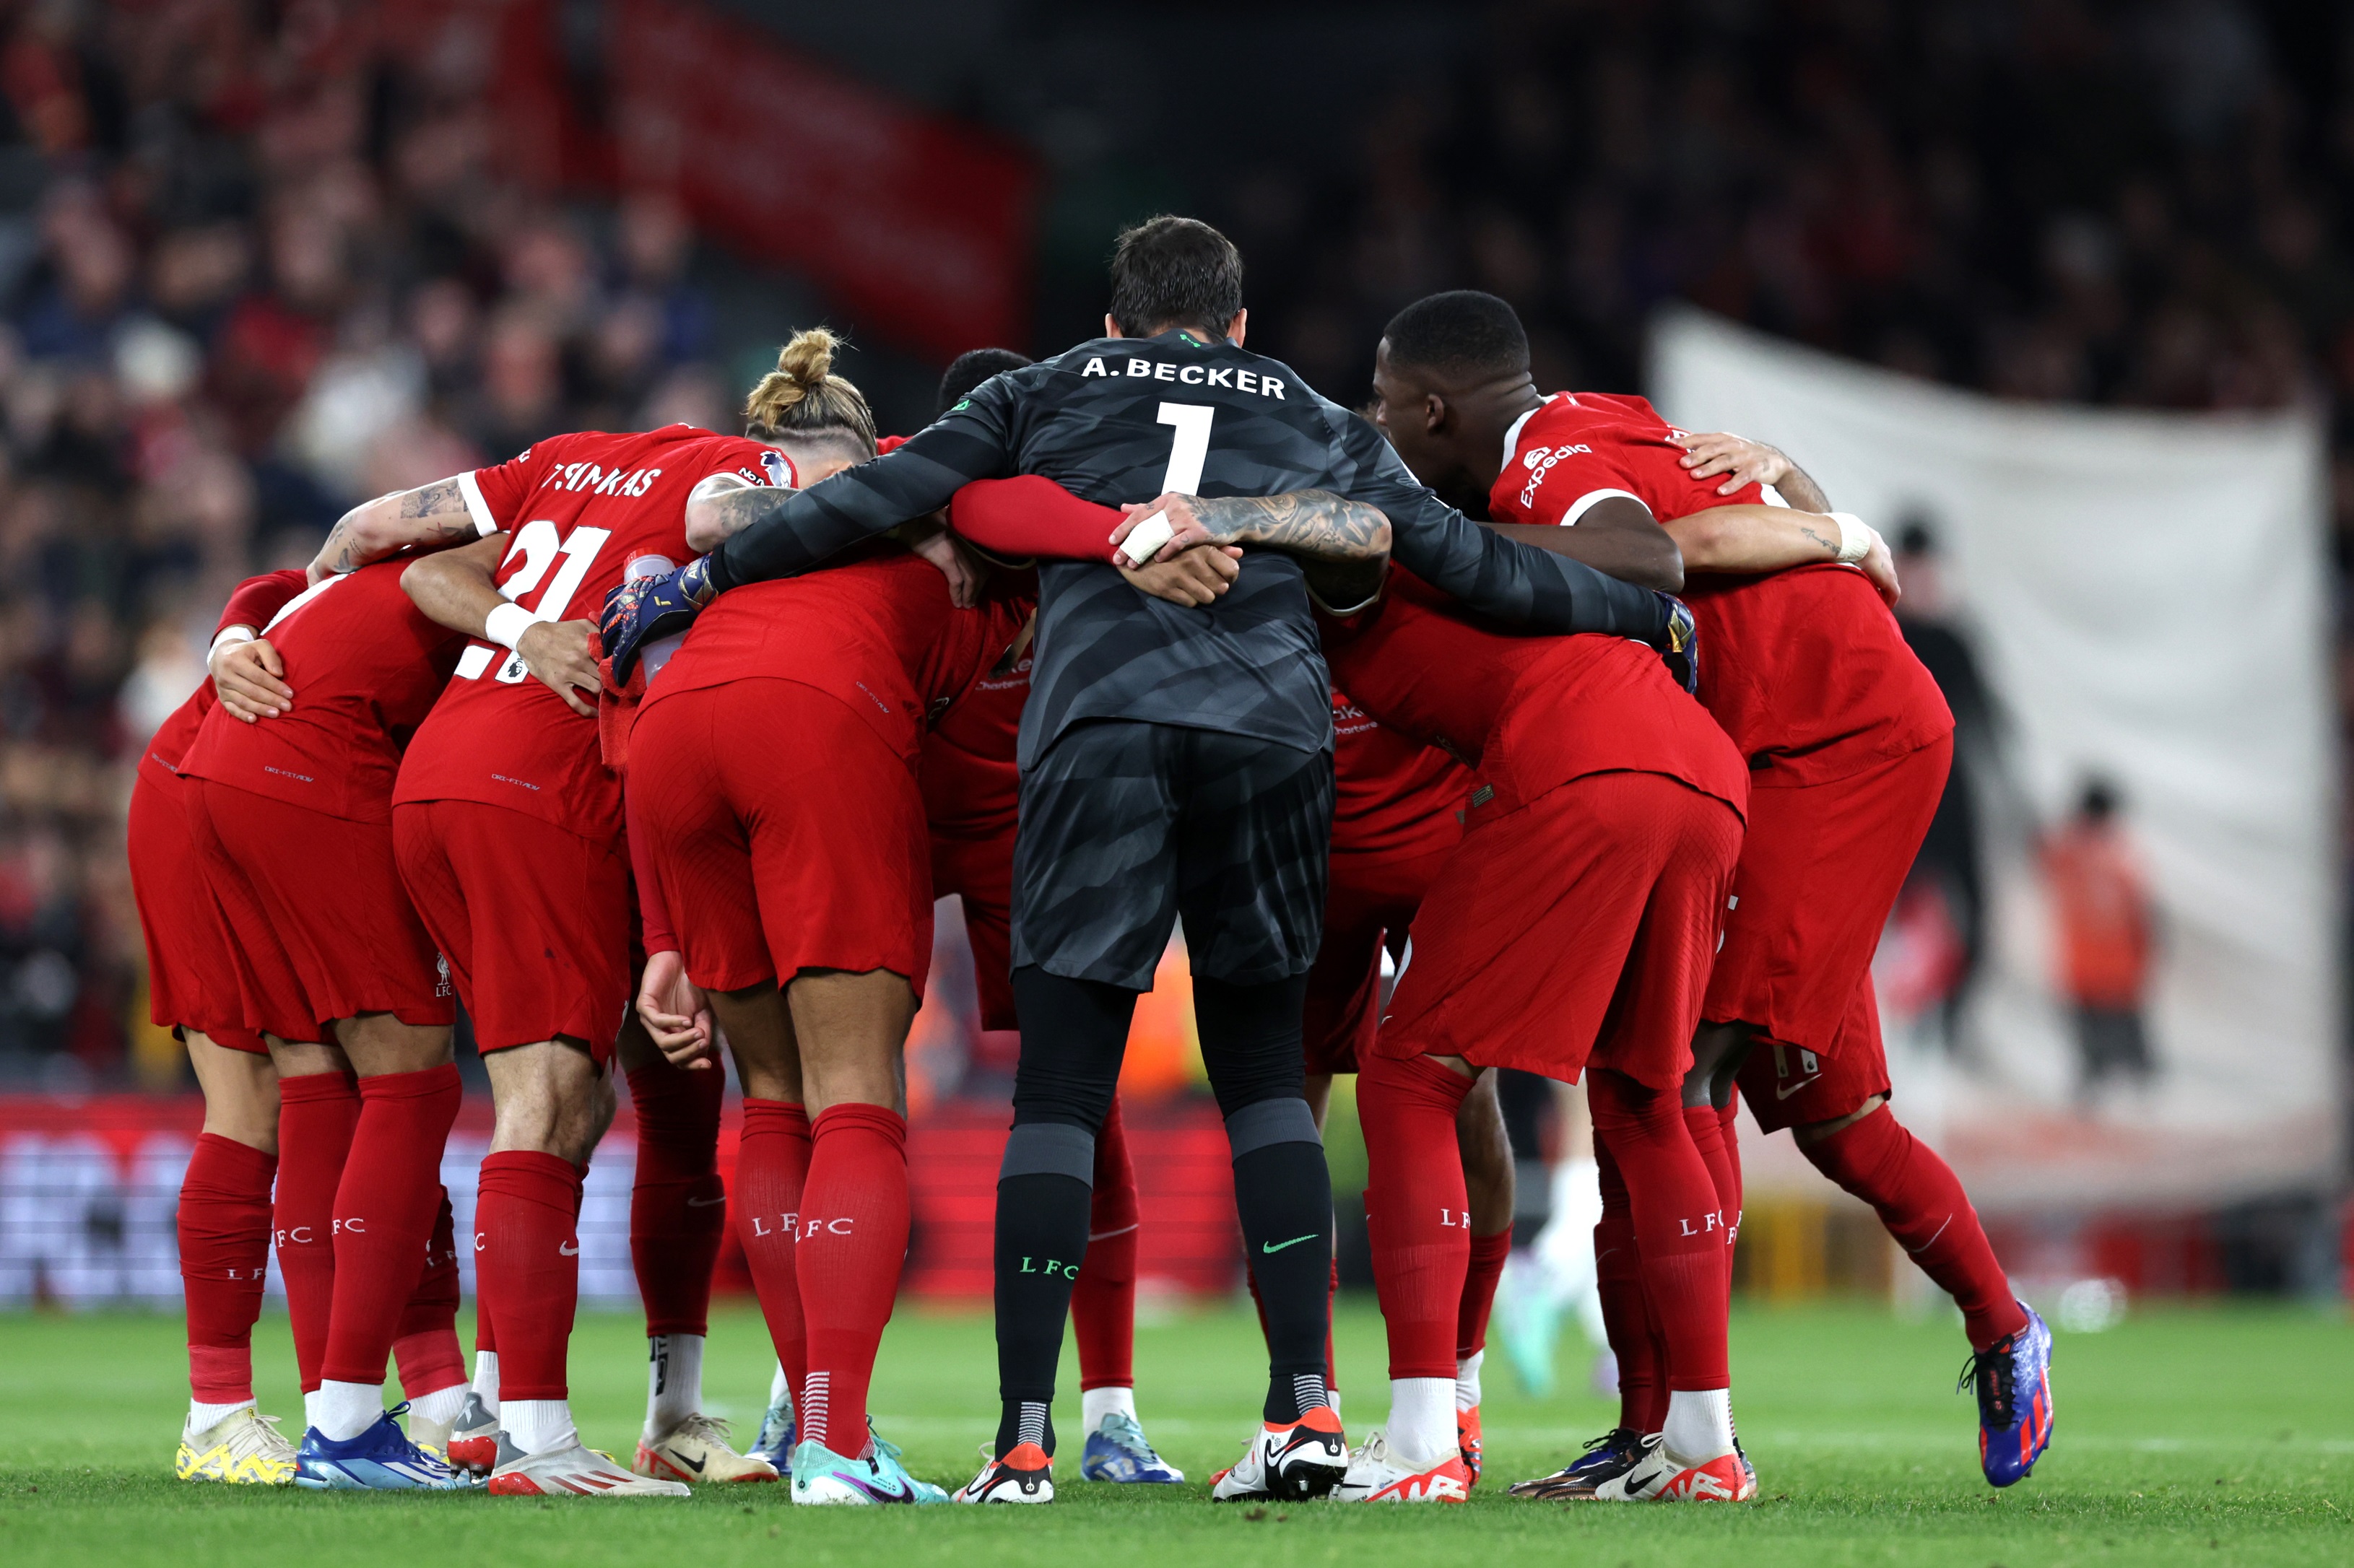 6 duels won: Liverpool wiz gives national team boss food for thought after ‘tremendous’ display